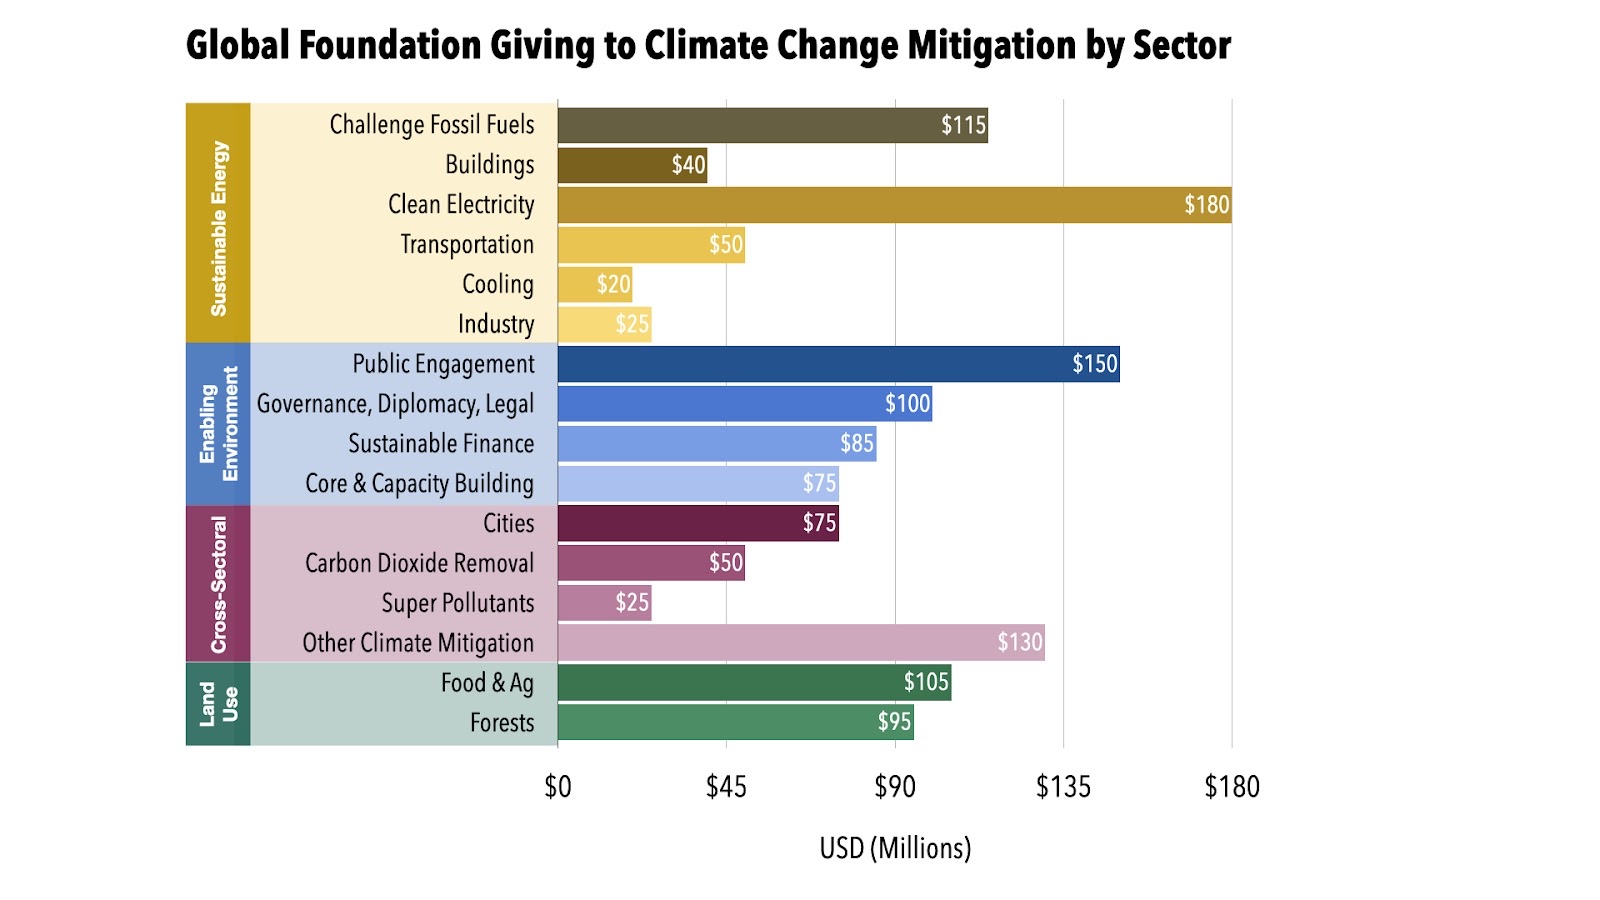 Global Foundation Giving to Climate Change Mitigation by Sector chart